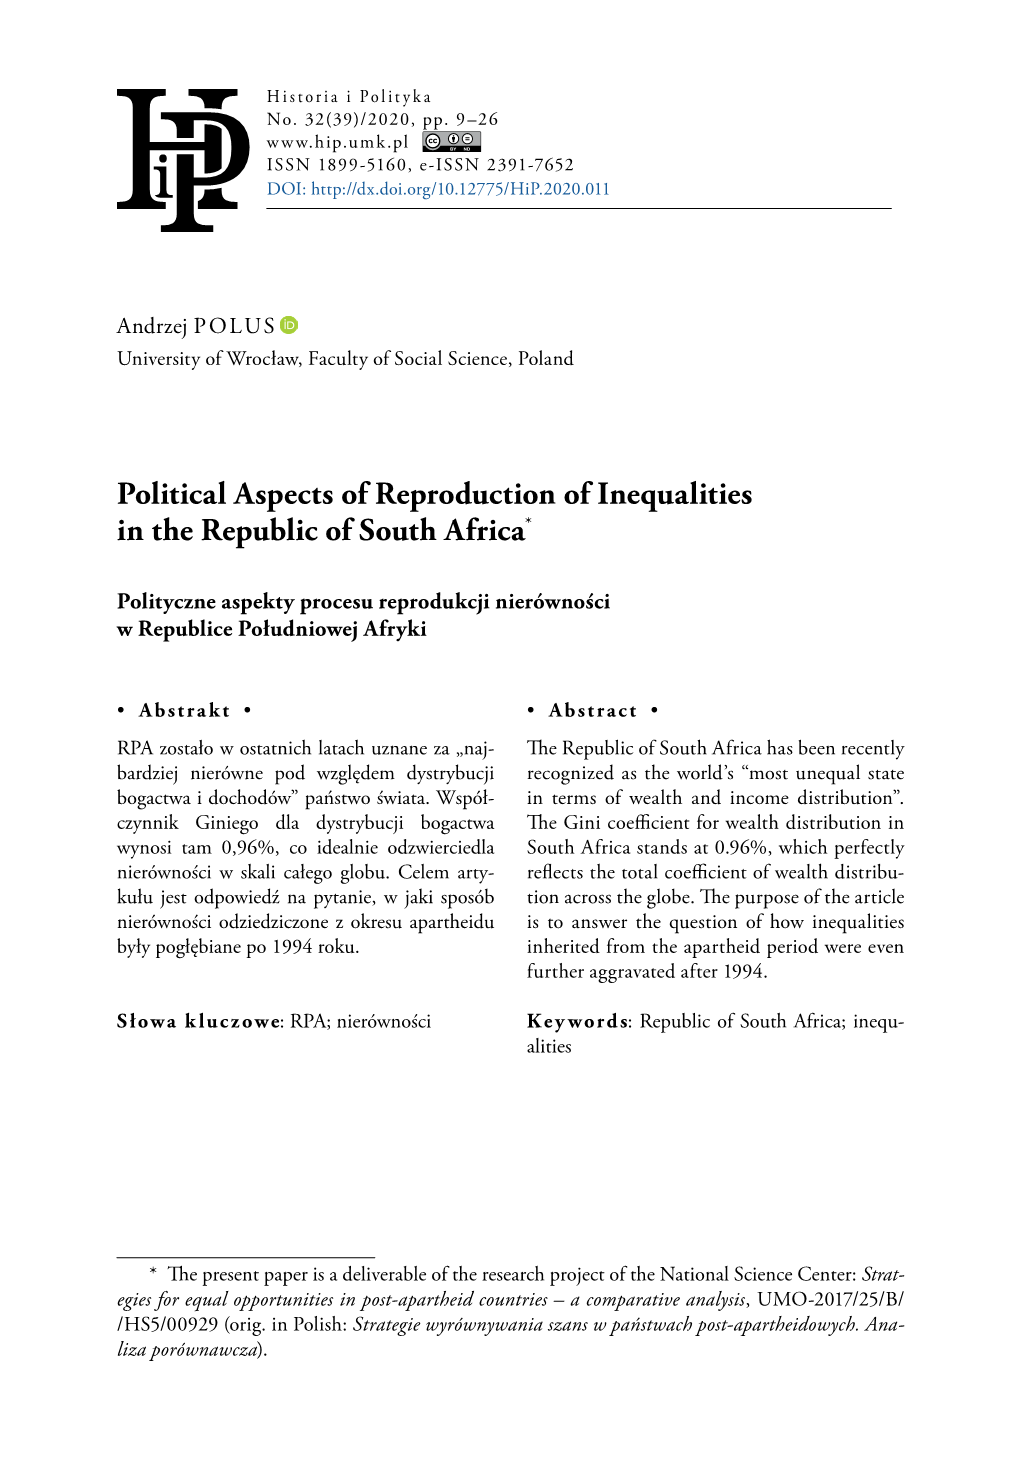 Political Aspects of Reproduction of Inequalities in the Republic of South Africa*